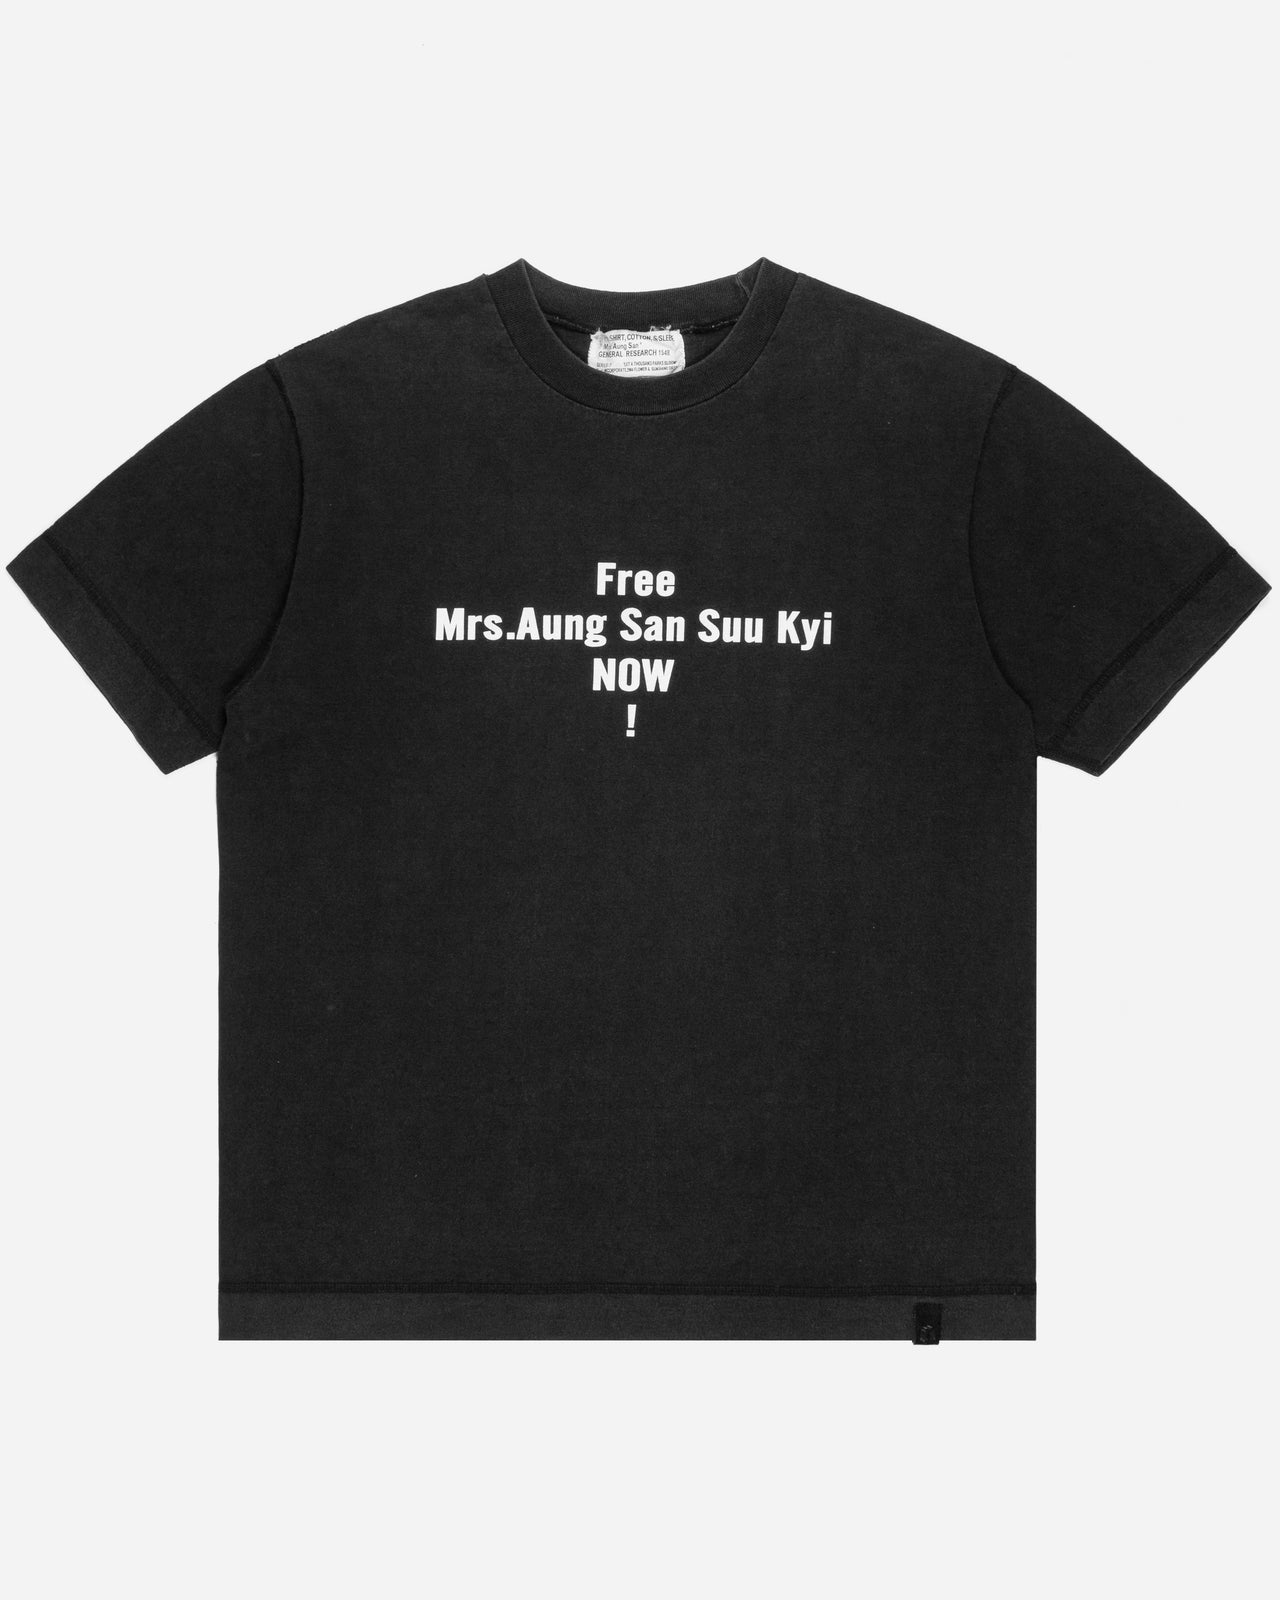 General Research “Mrs. Aung San” Tee - 2004